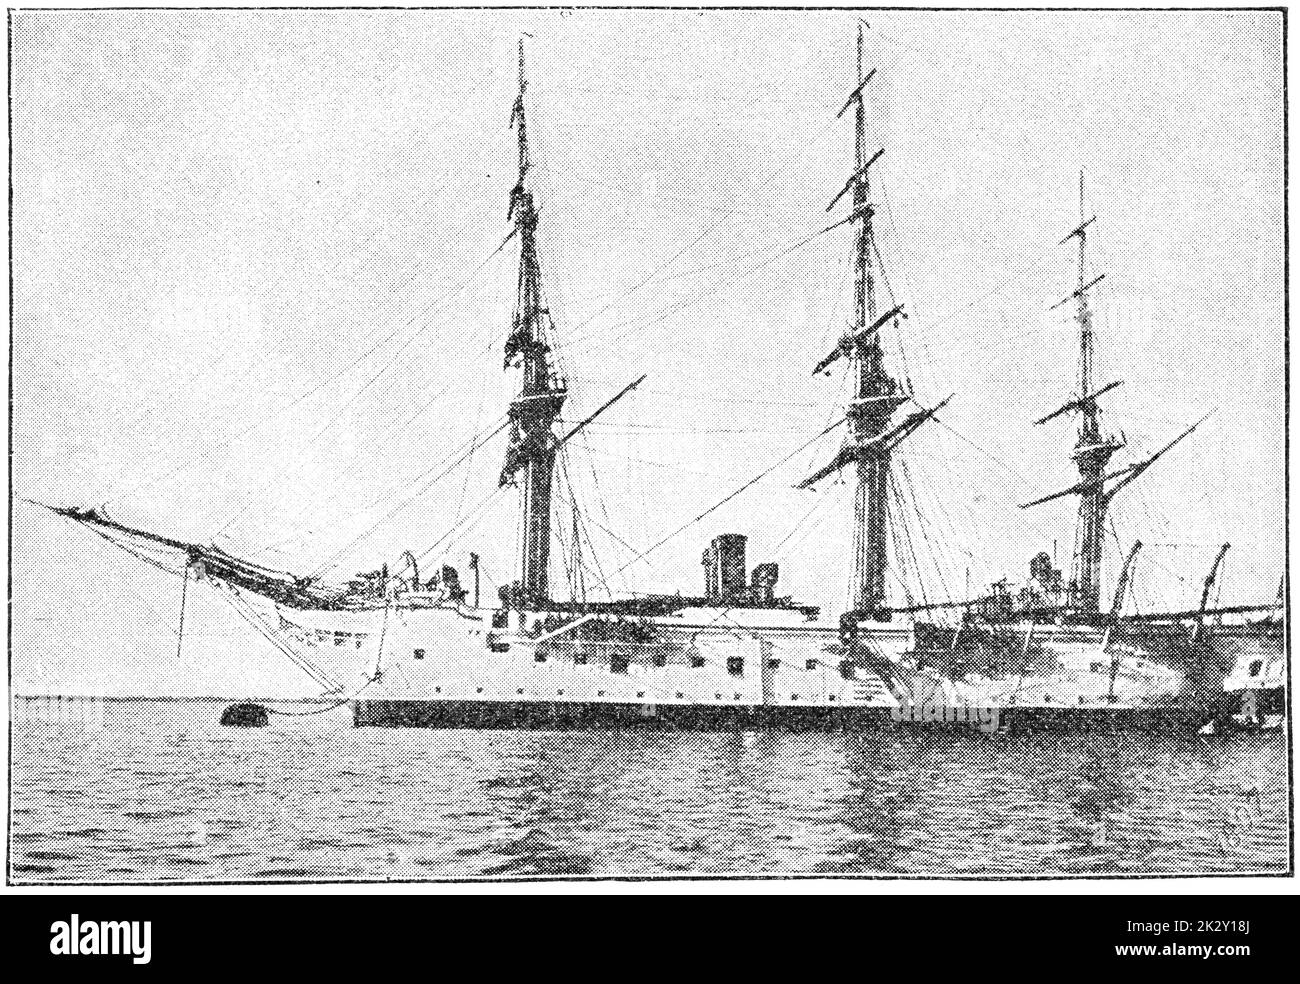 SMS Nixe (1879) - a steam corvette (training ship for naval cadets) built for the German Kaiserliche Marine (Imperial Navy). Illustration of the 19th century. Germany. White background. Stock Photo